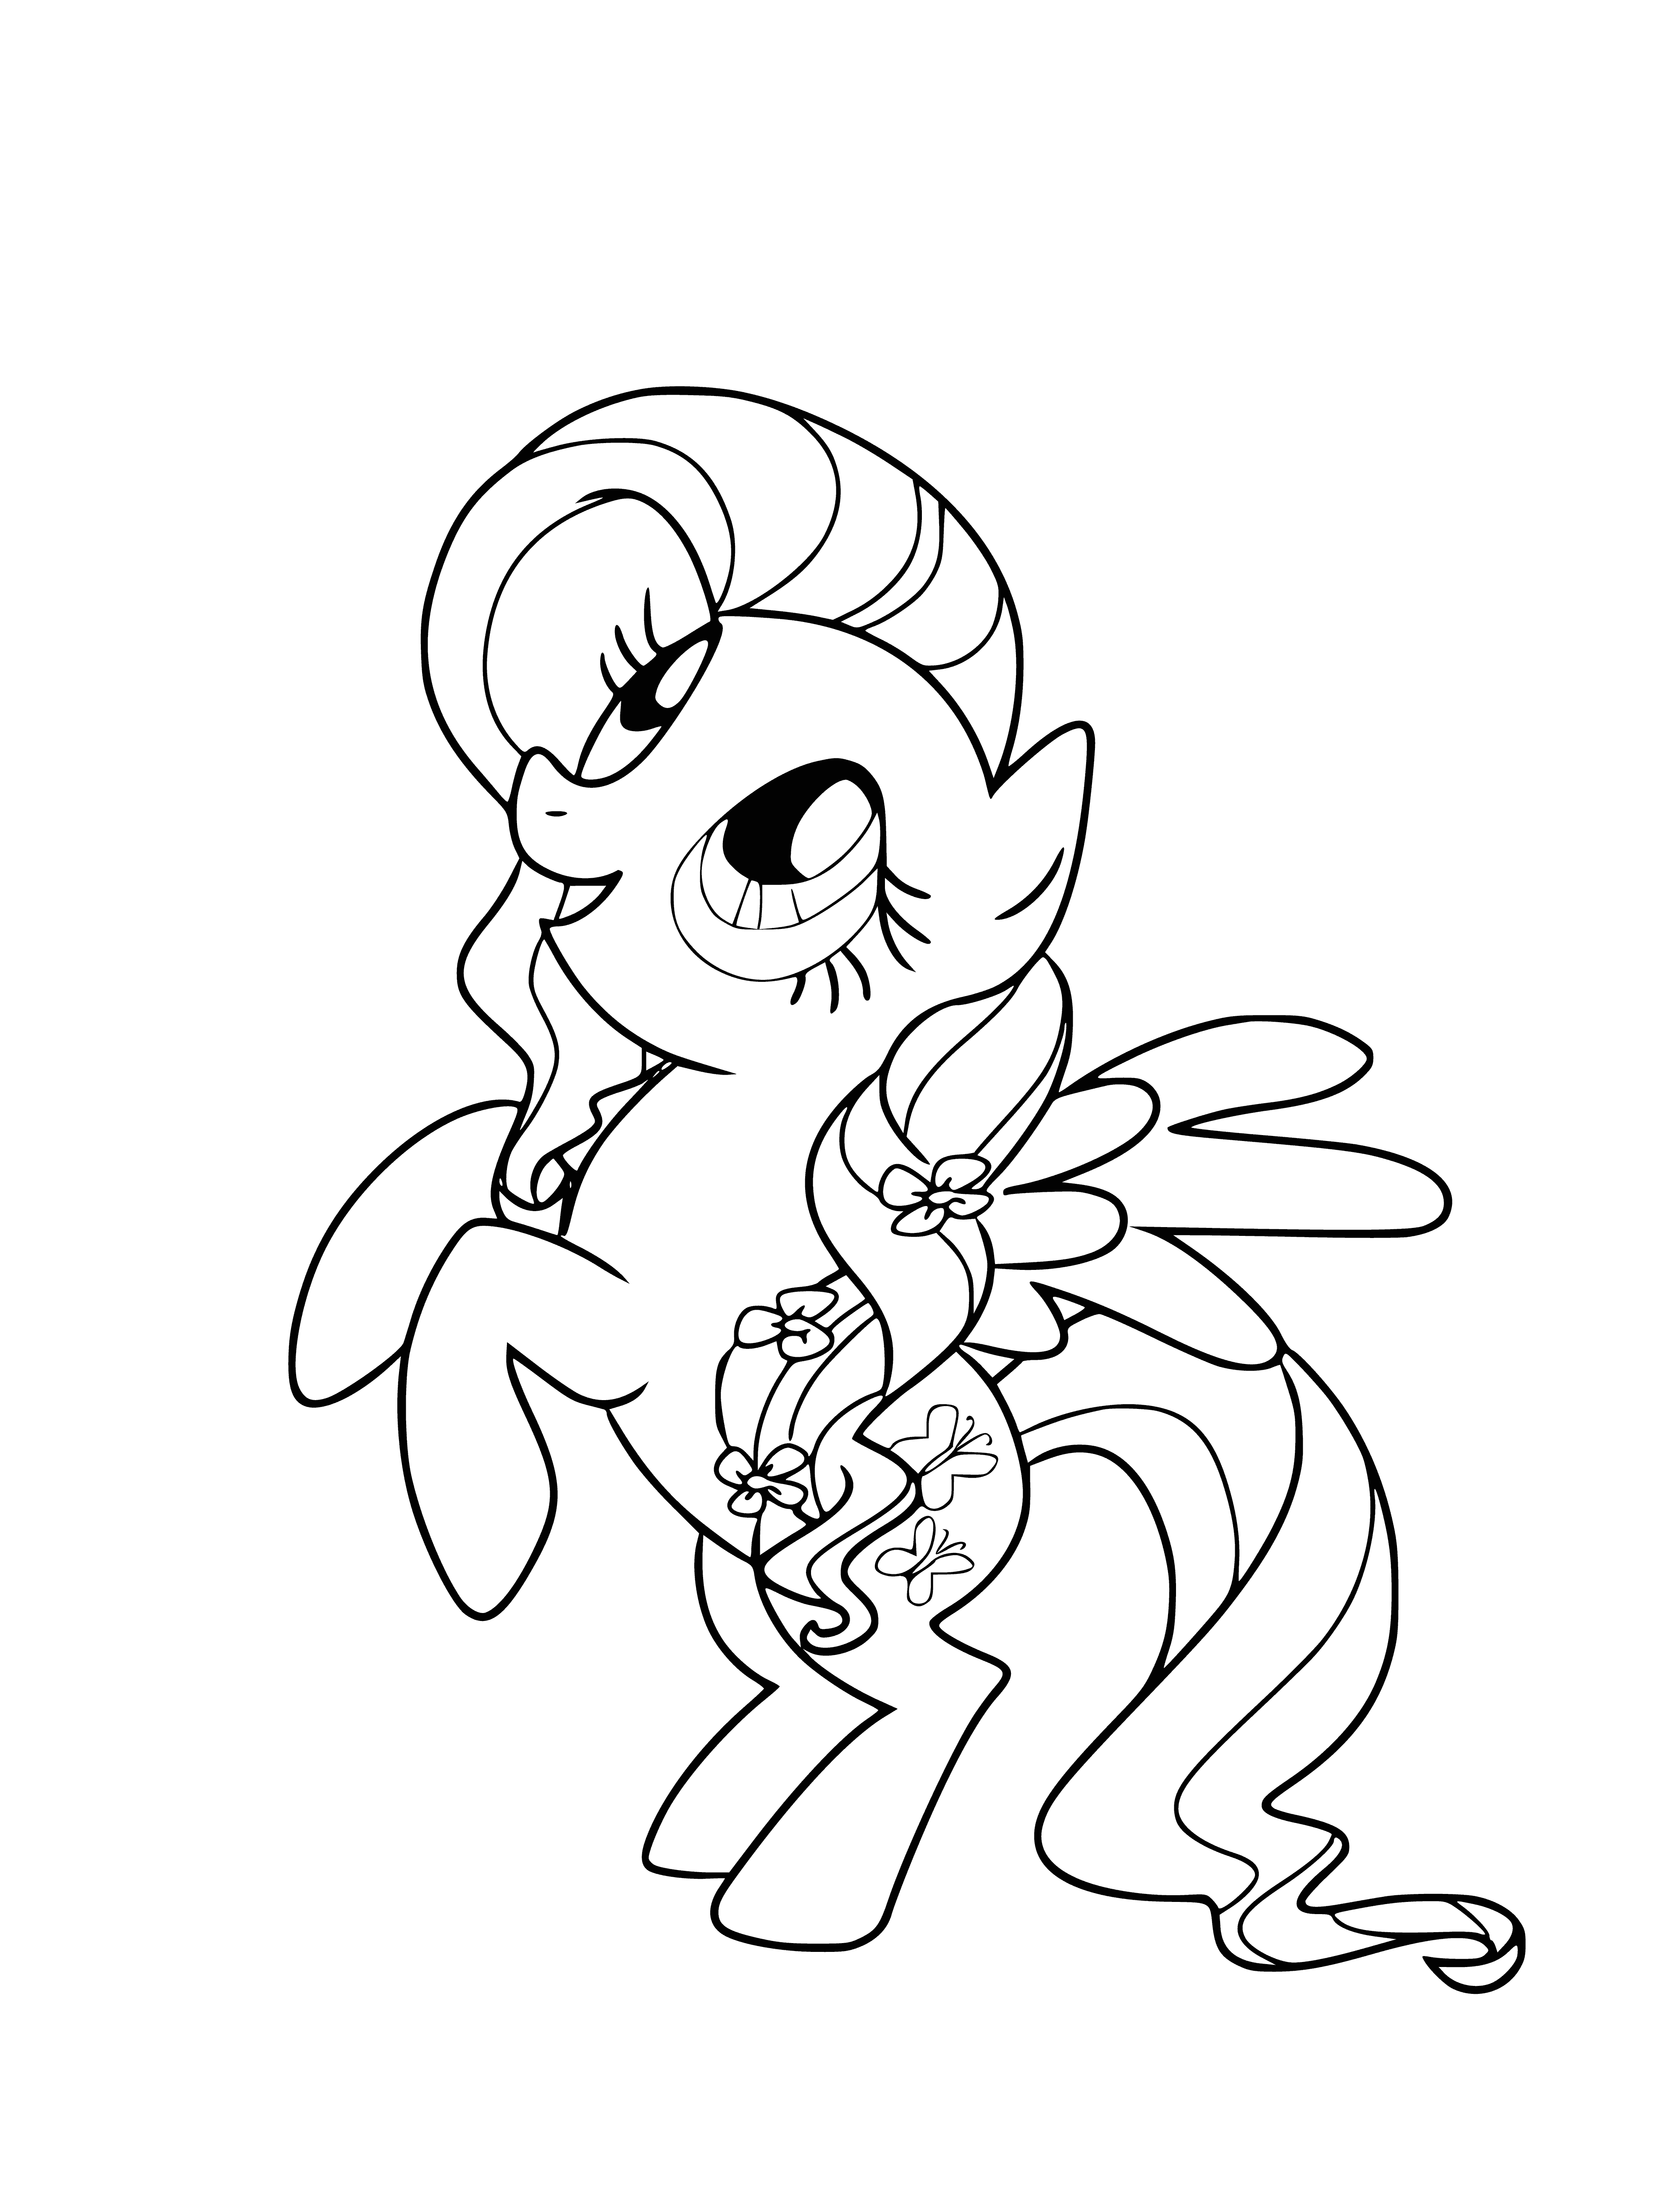 coloring page: Fluttershy is a gentle, shy yellow pony w/ pink mane/tail, big blue eyes & 3 pink butterflies Cutie Mark; loves animals & cares for them.